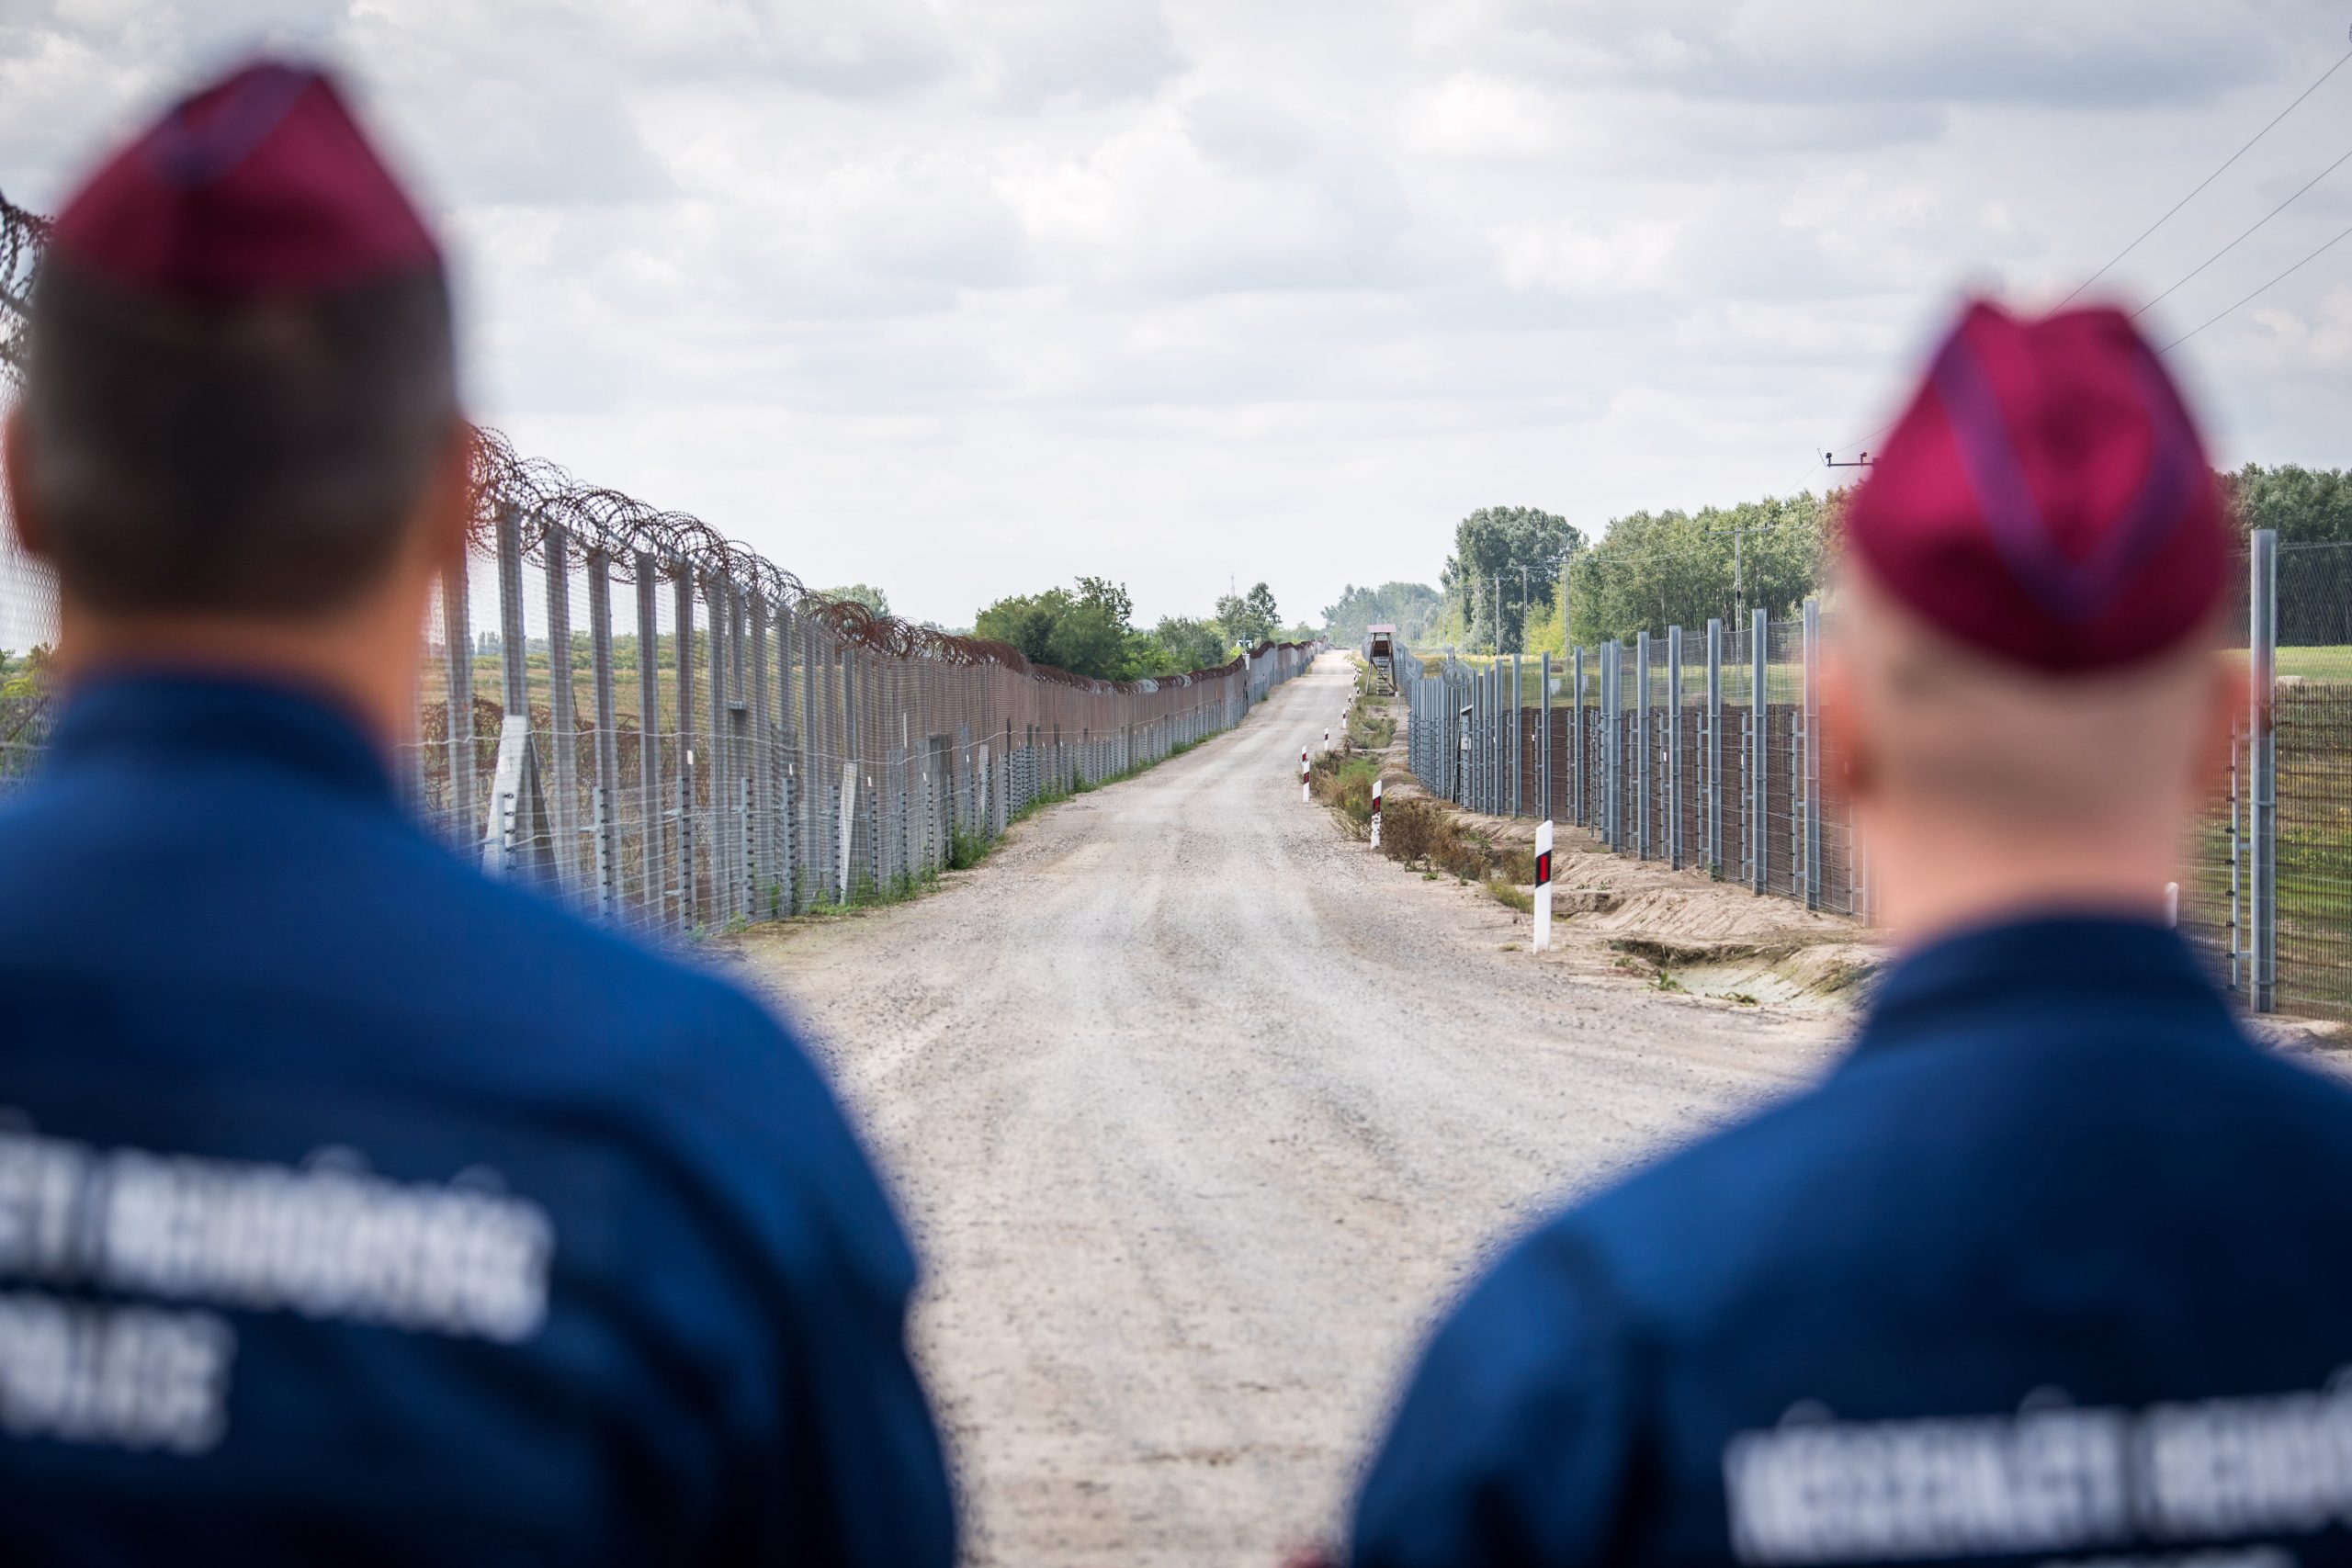 Hungarian Police Dealt with More Than 800 Migrants in Just One Day